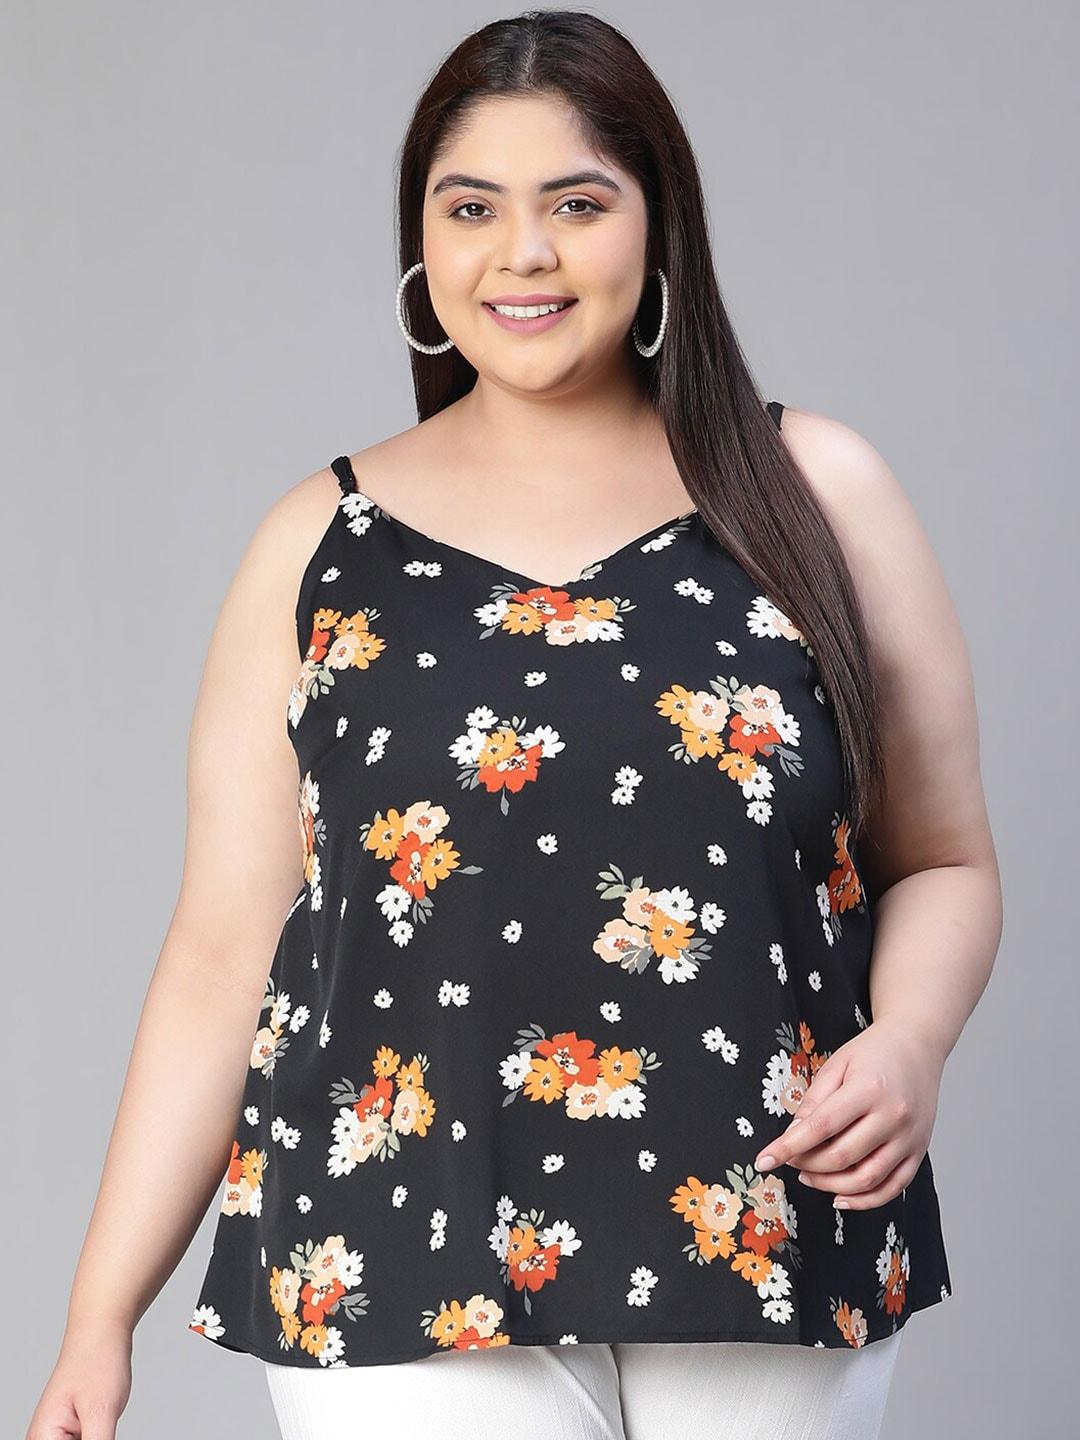 oxolloxo plus size floral printed shoulder straps a-line top